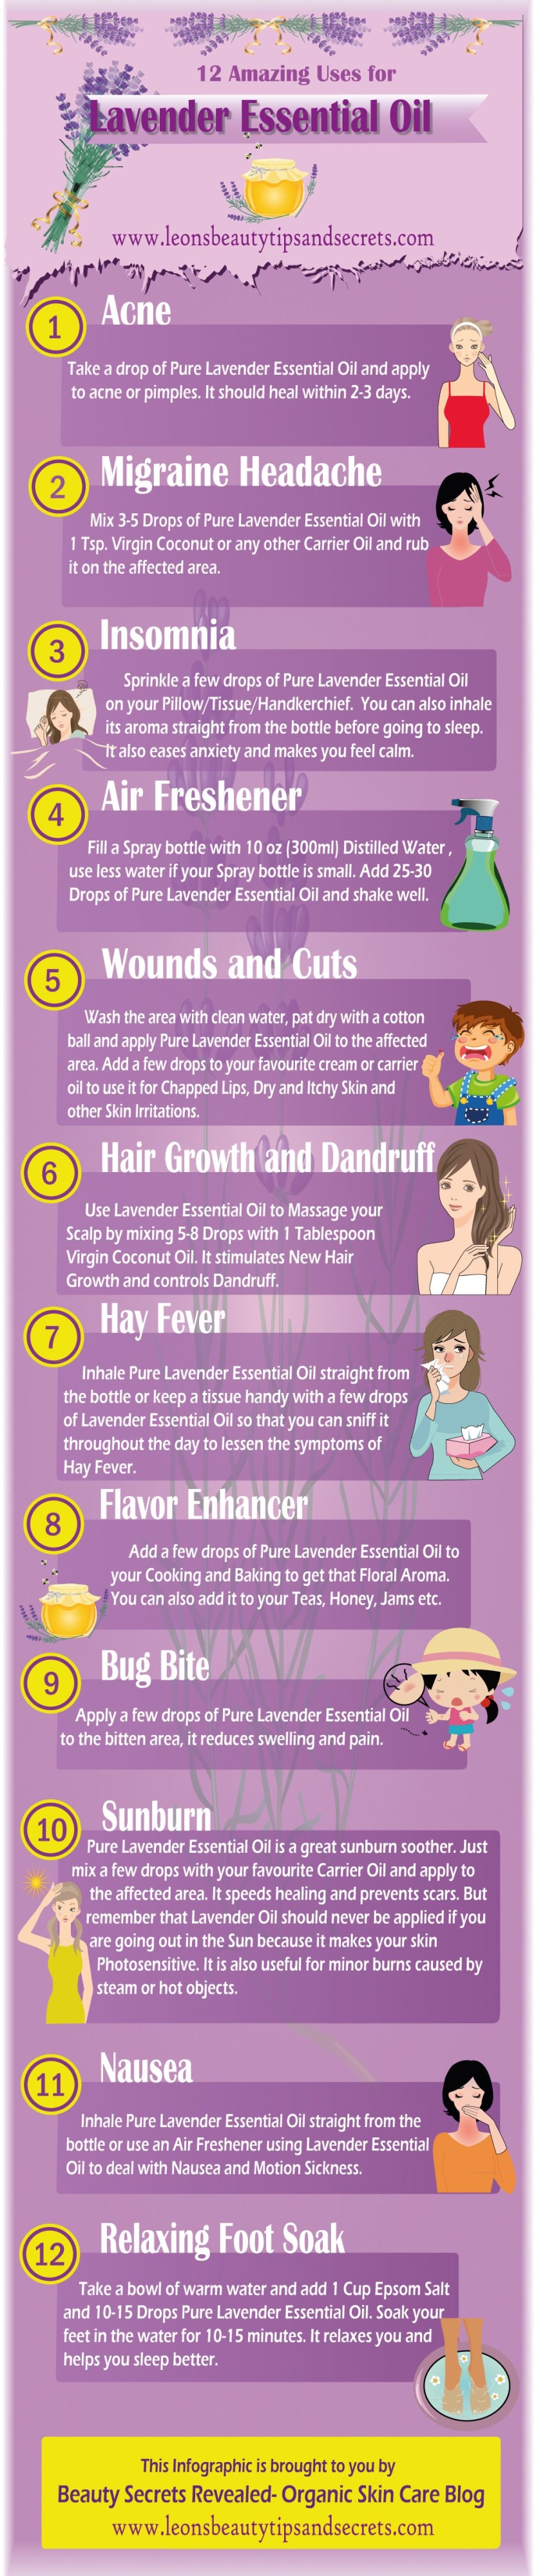 12 Amazing Uses For Lavender Essential Oil Infographic